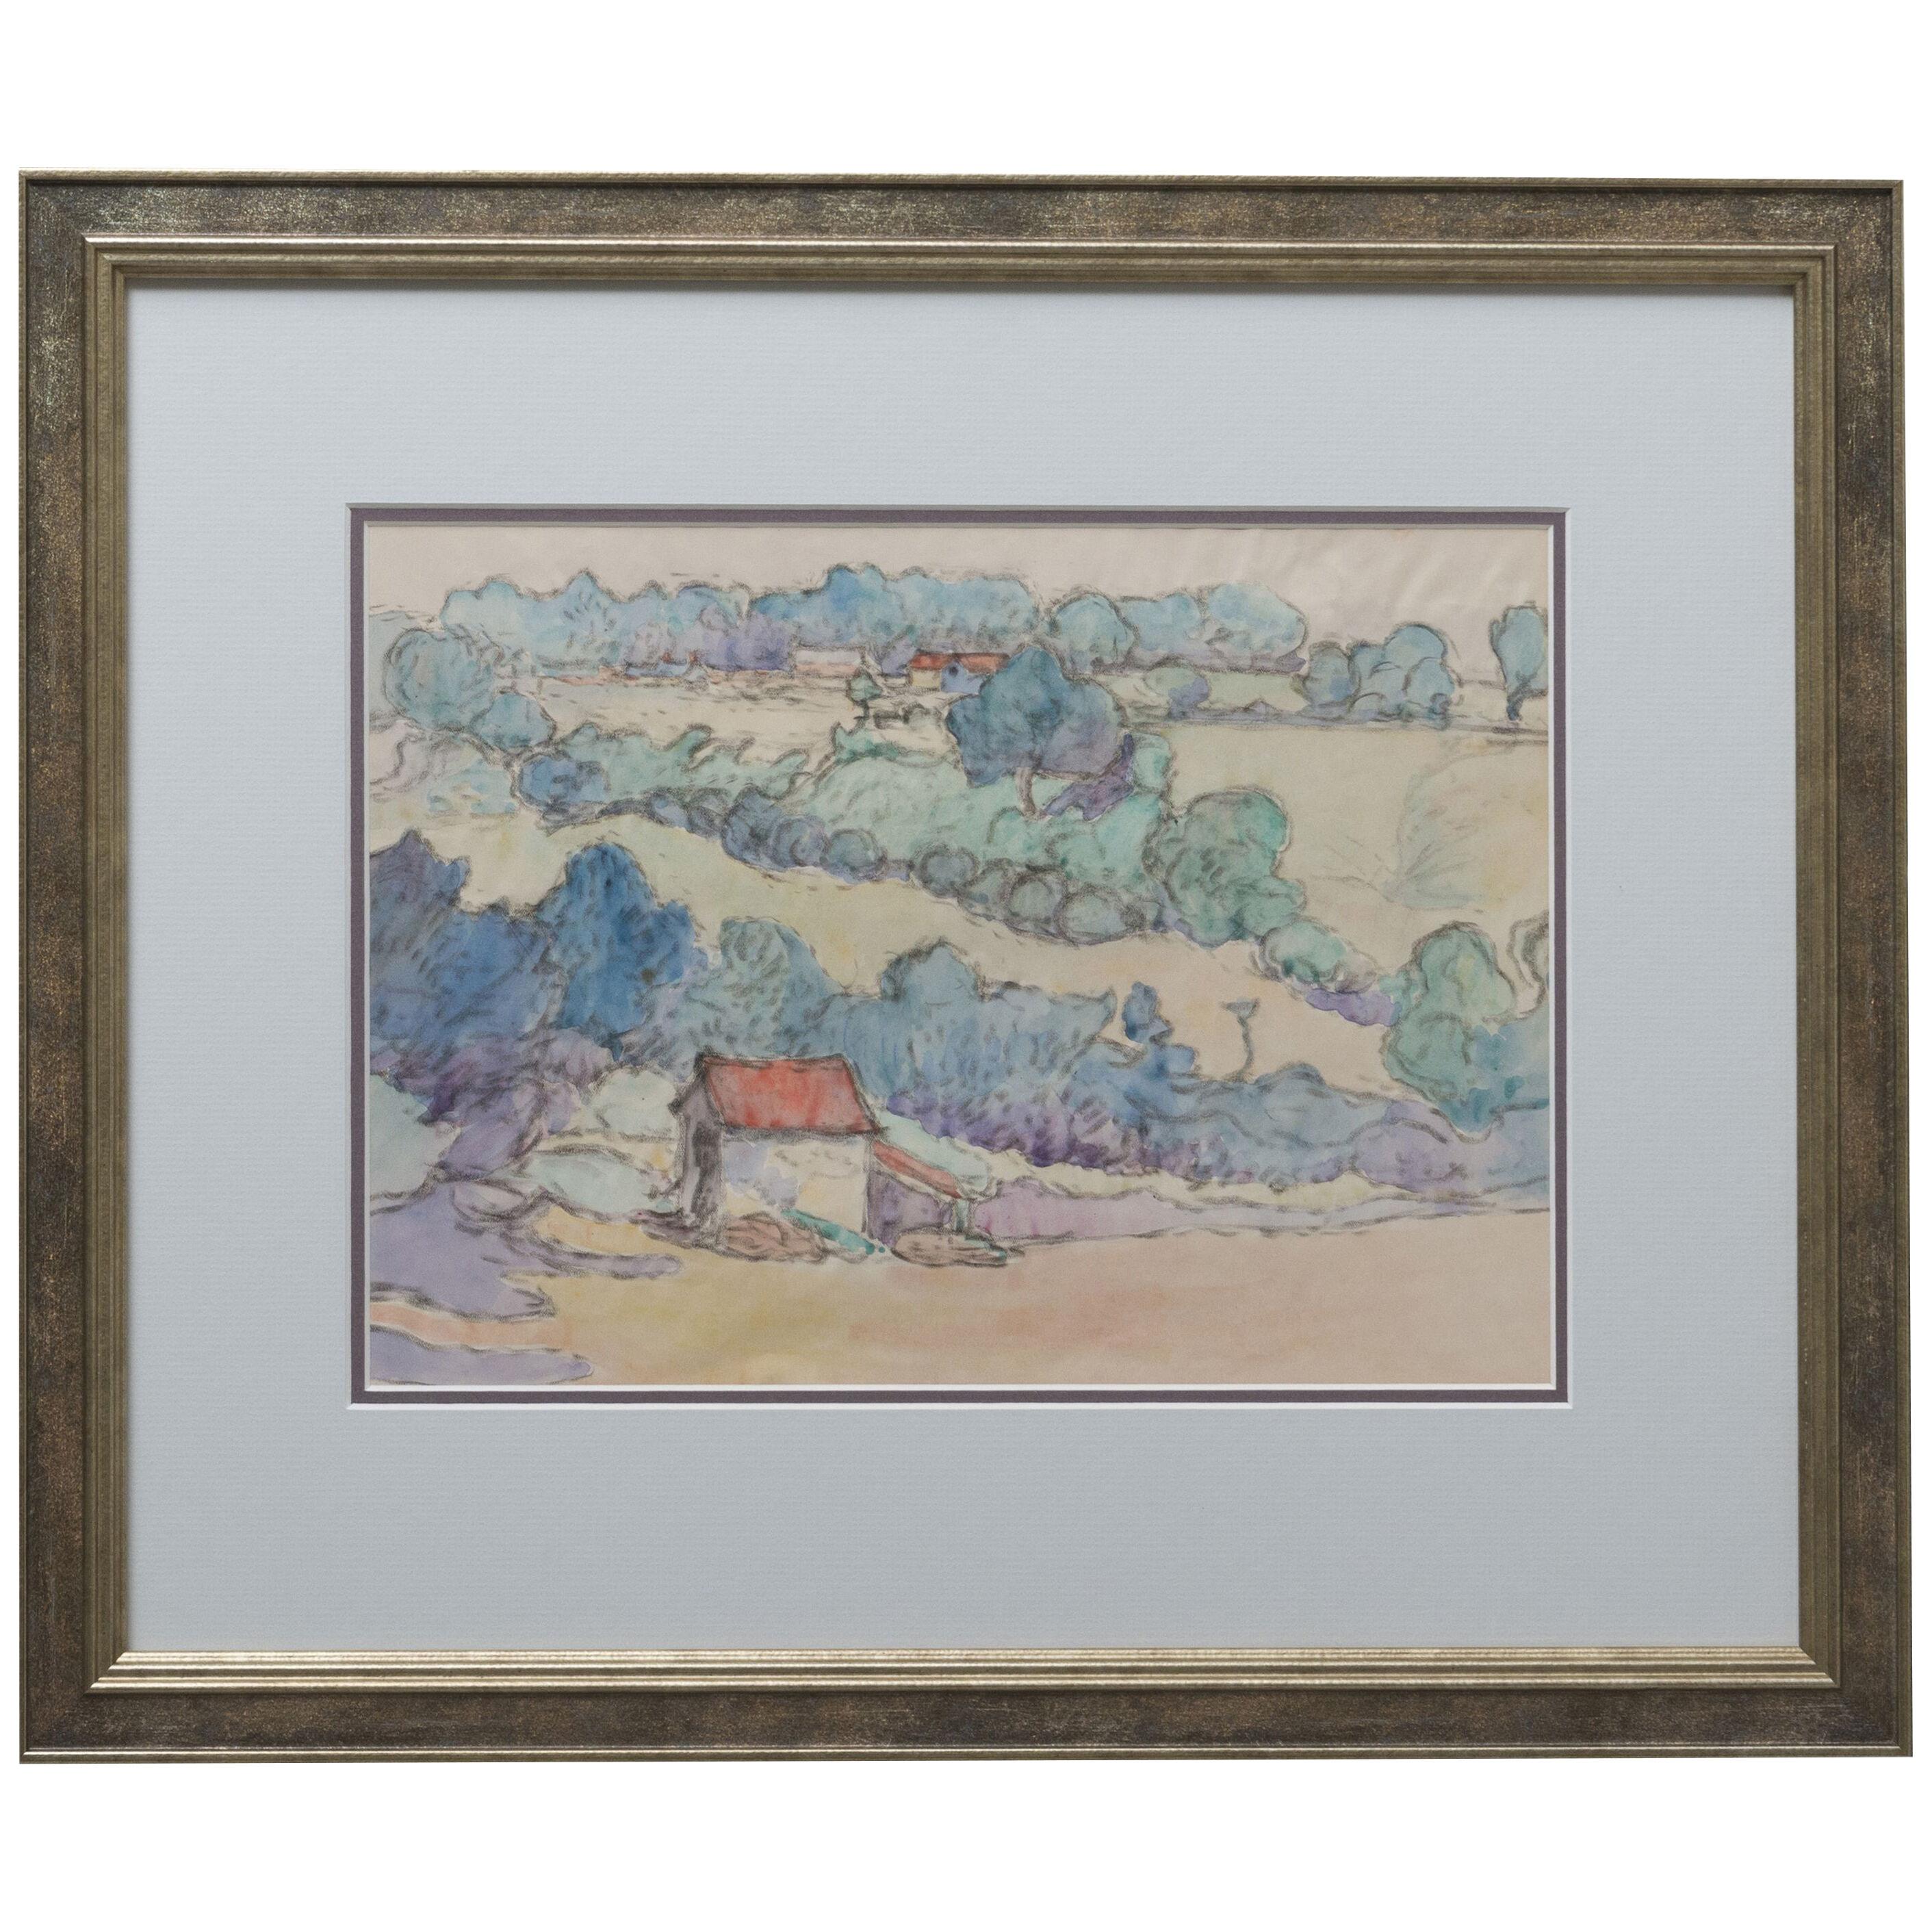 Watercolour on paper drawing by Robert Polhill Bevan, England circa 1900